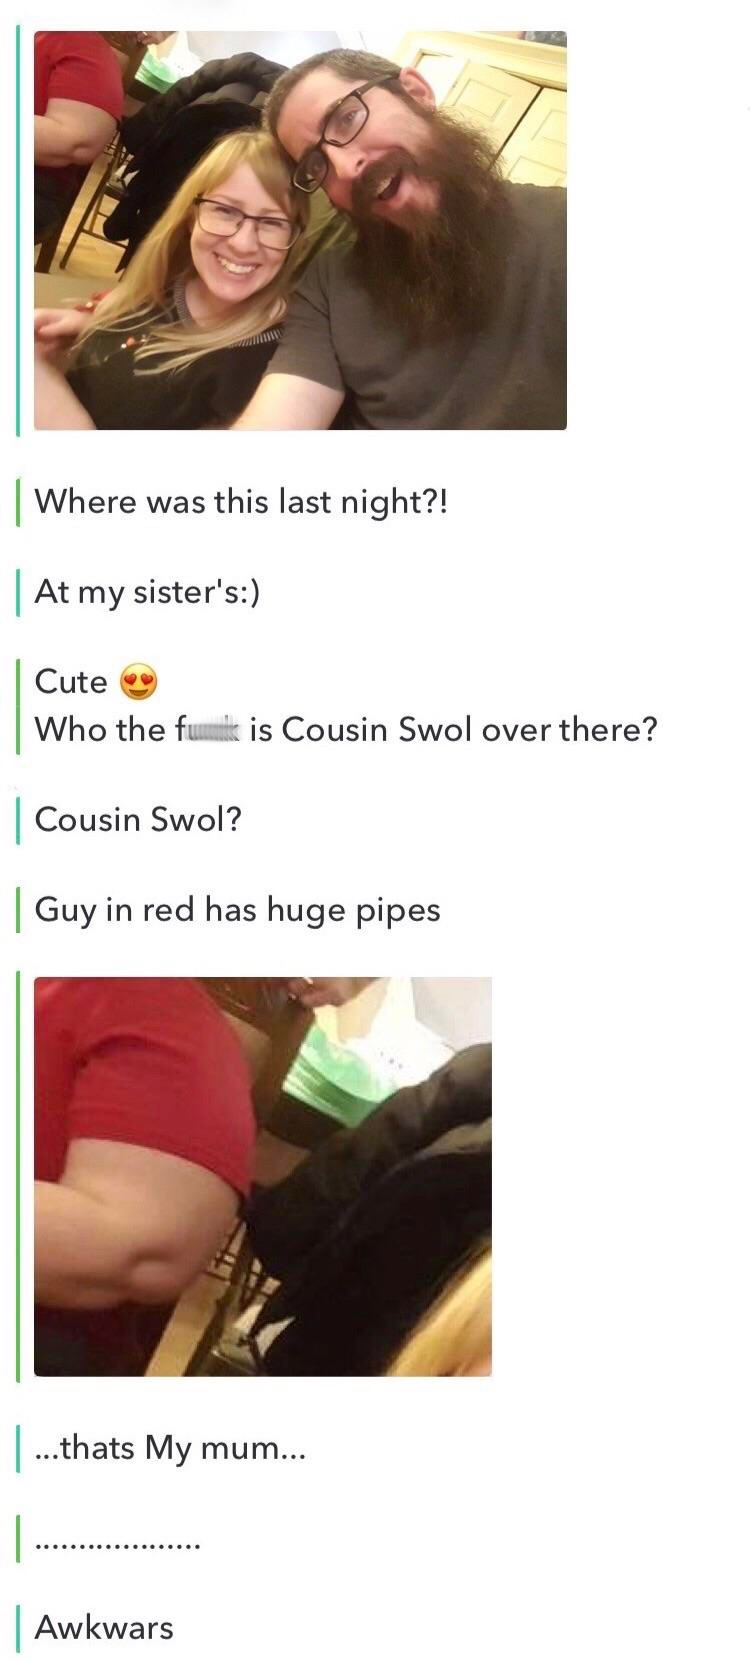 cousin swol - Where was this last night?! At my sister's Cute Who the fwmwk is Cousin Swol over there? Cousin Swol? Guy in red has huge pipes ...thats My mum... ................... Awkwars